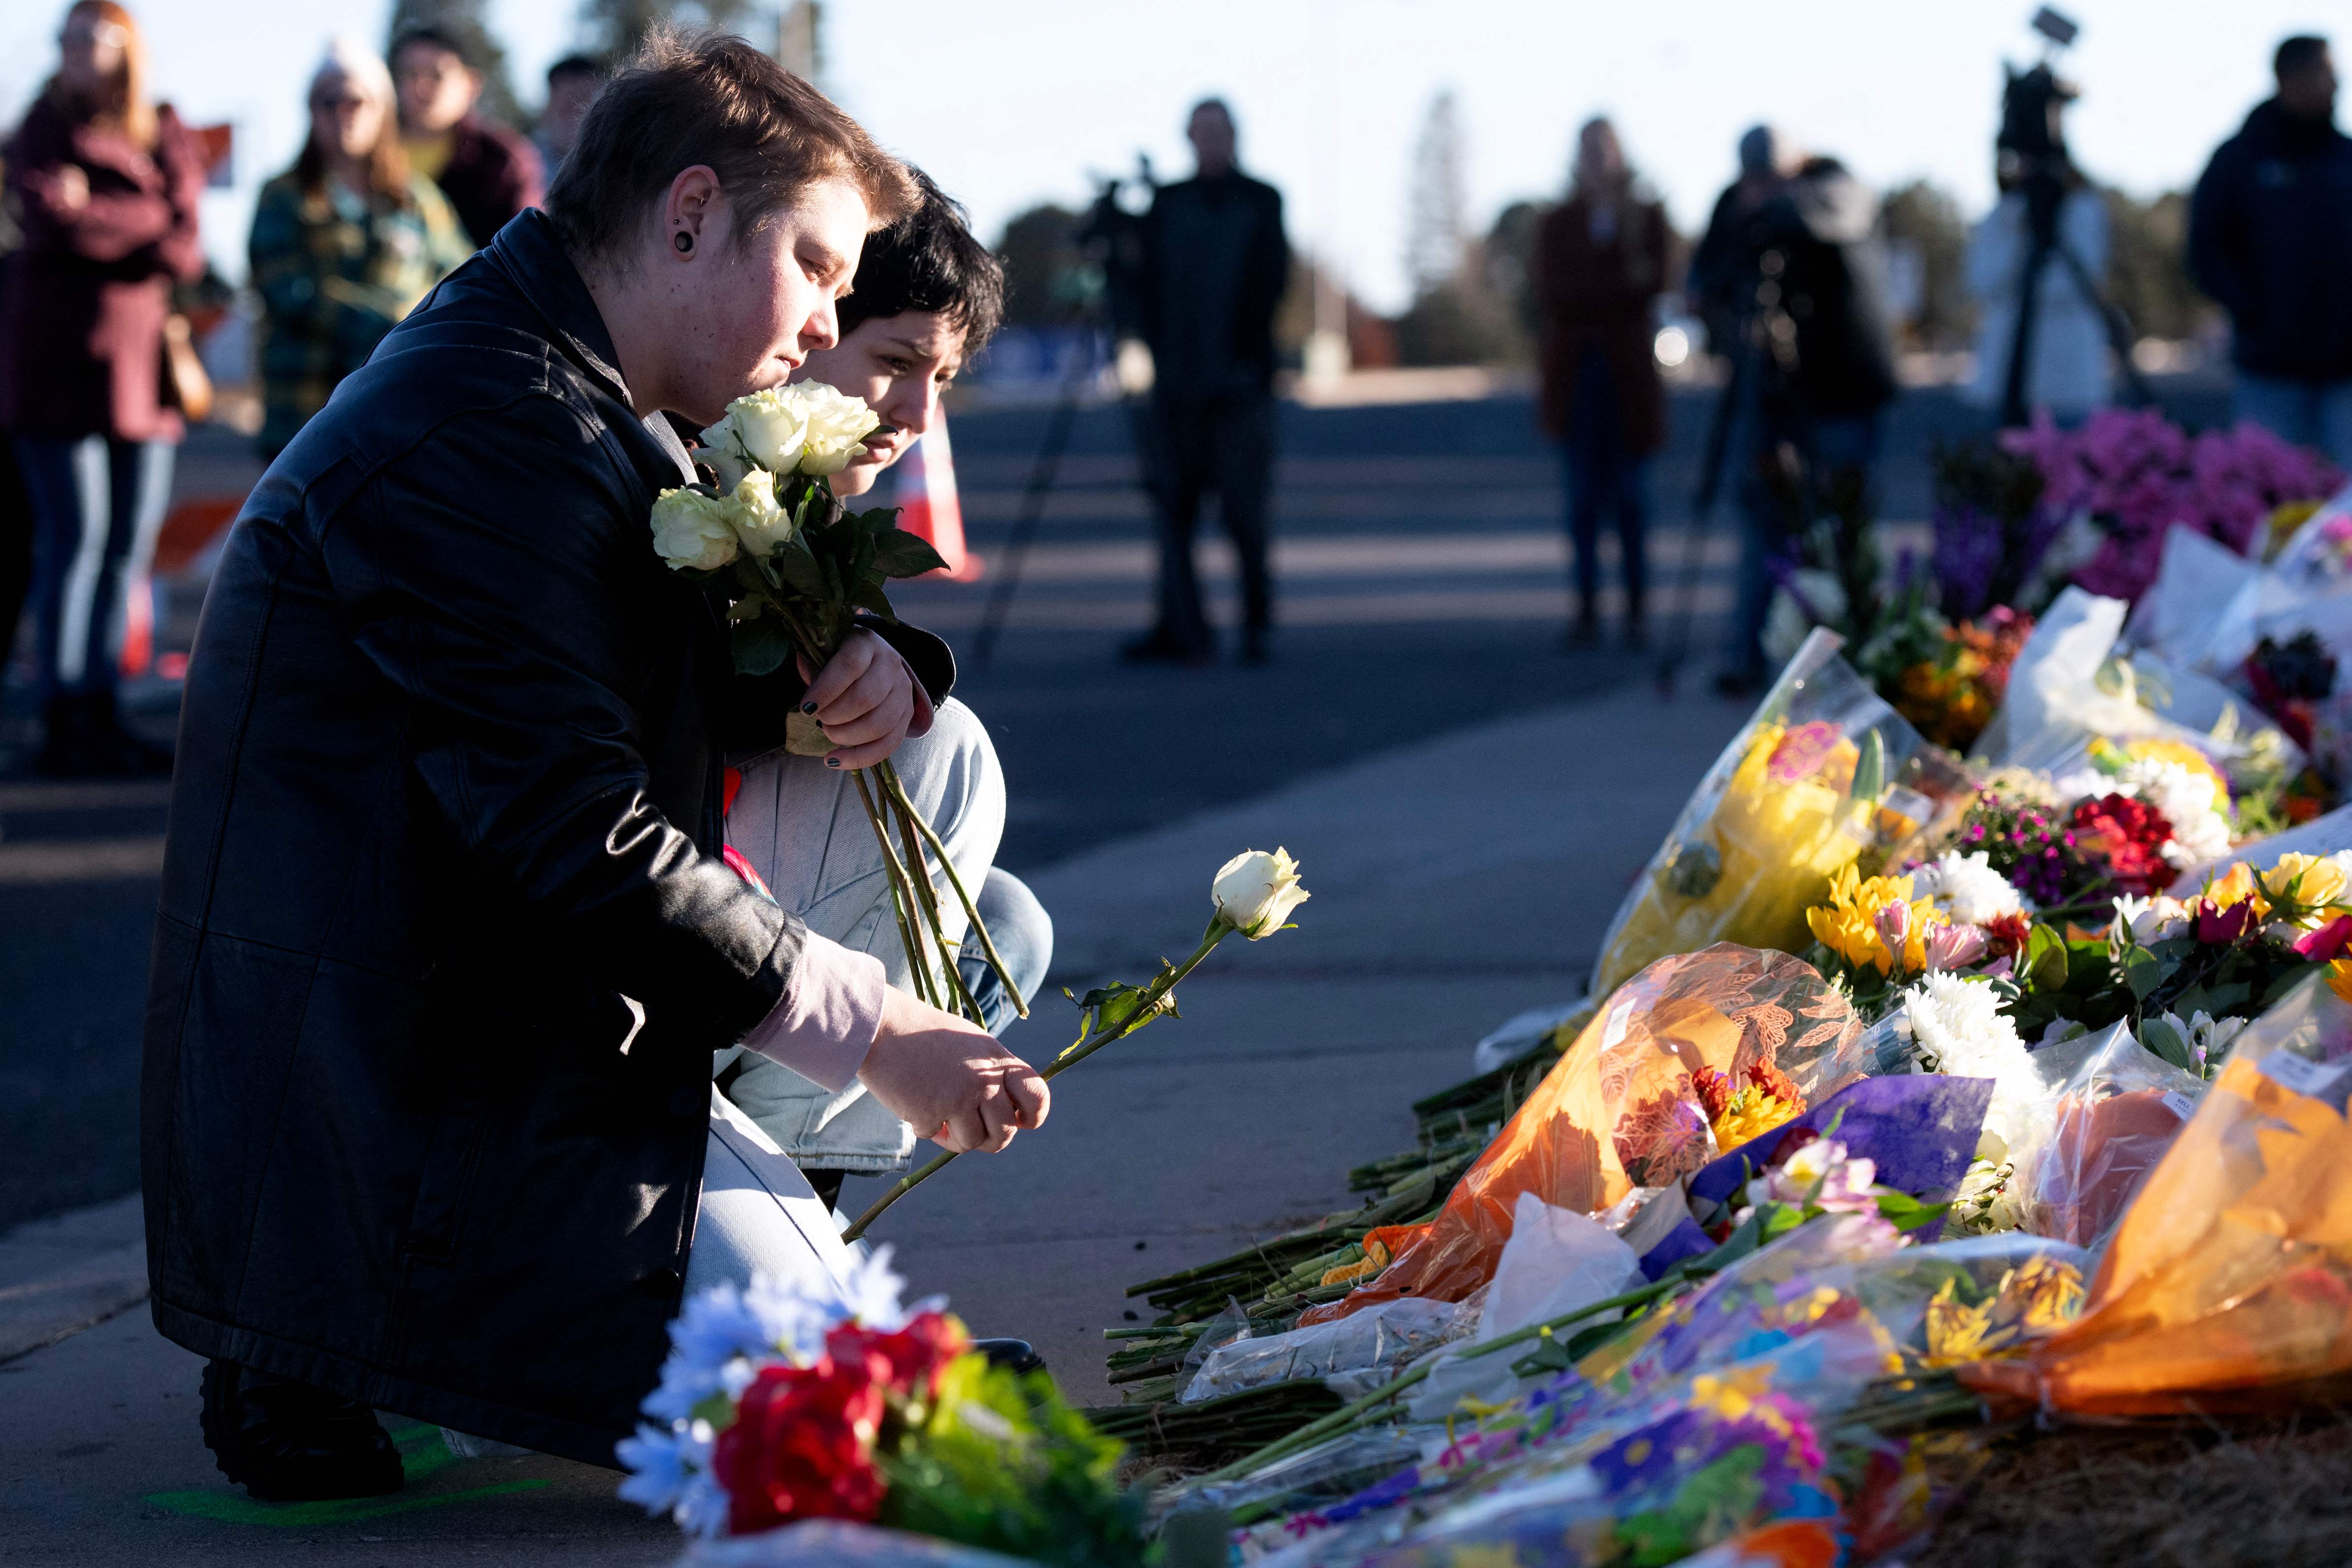 Mourners Ren Kurgis and Jessie Pacheco visit a memorial for victims of the Club Q attack on 20 November